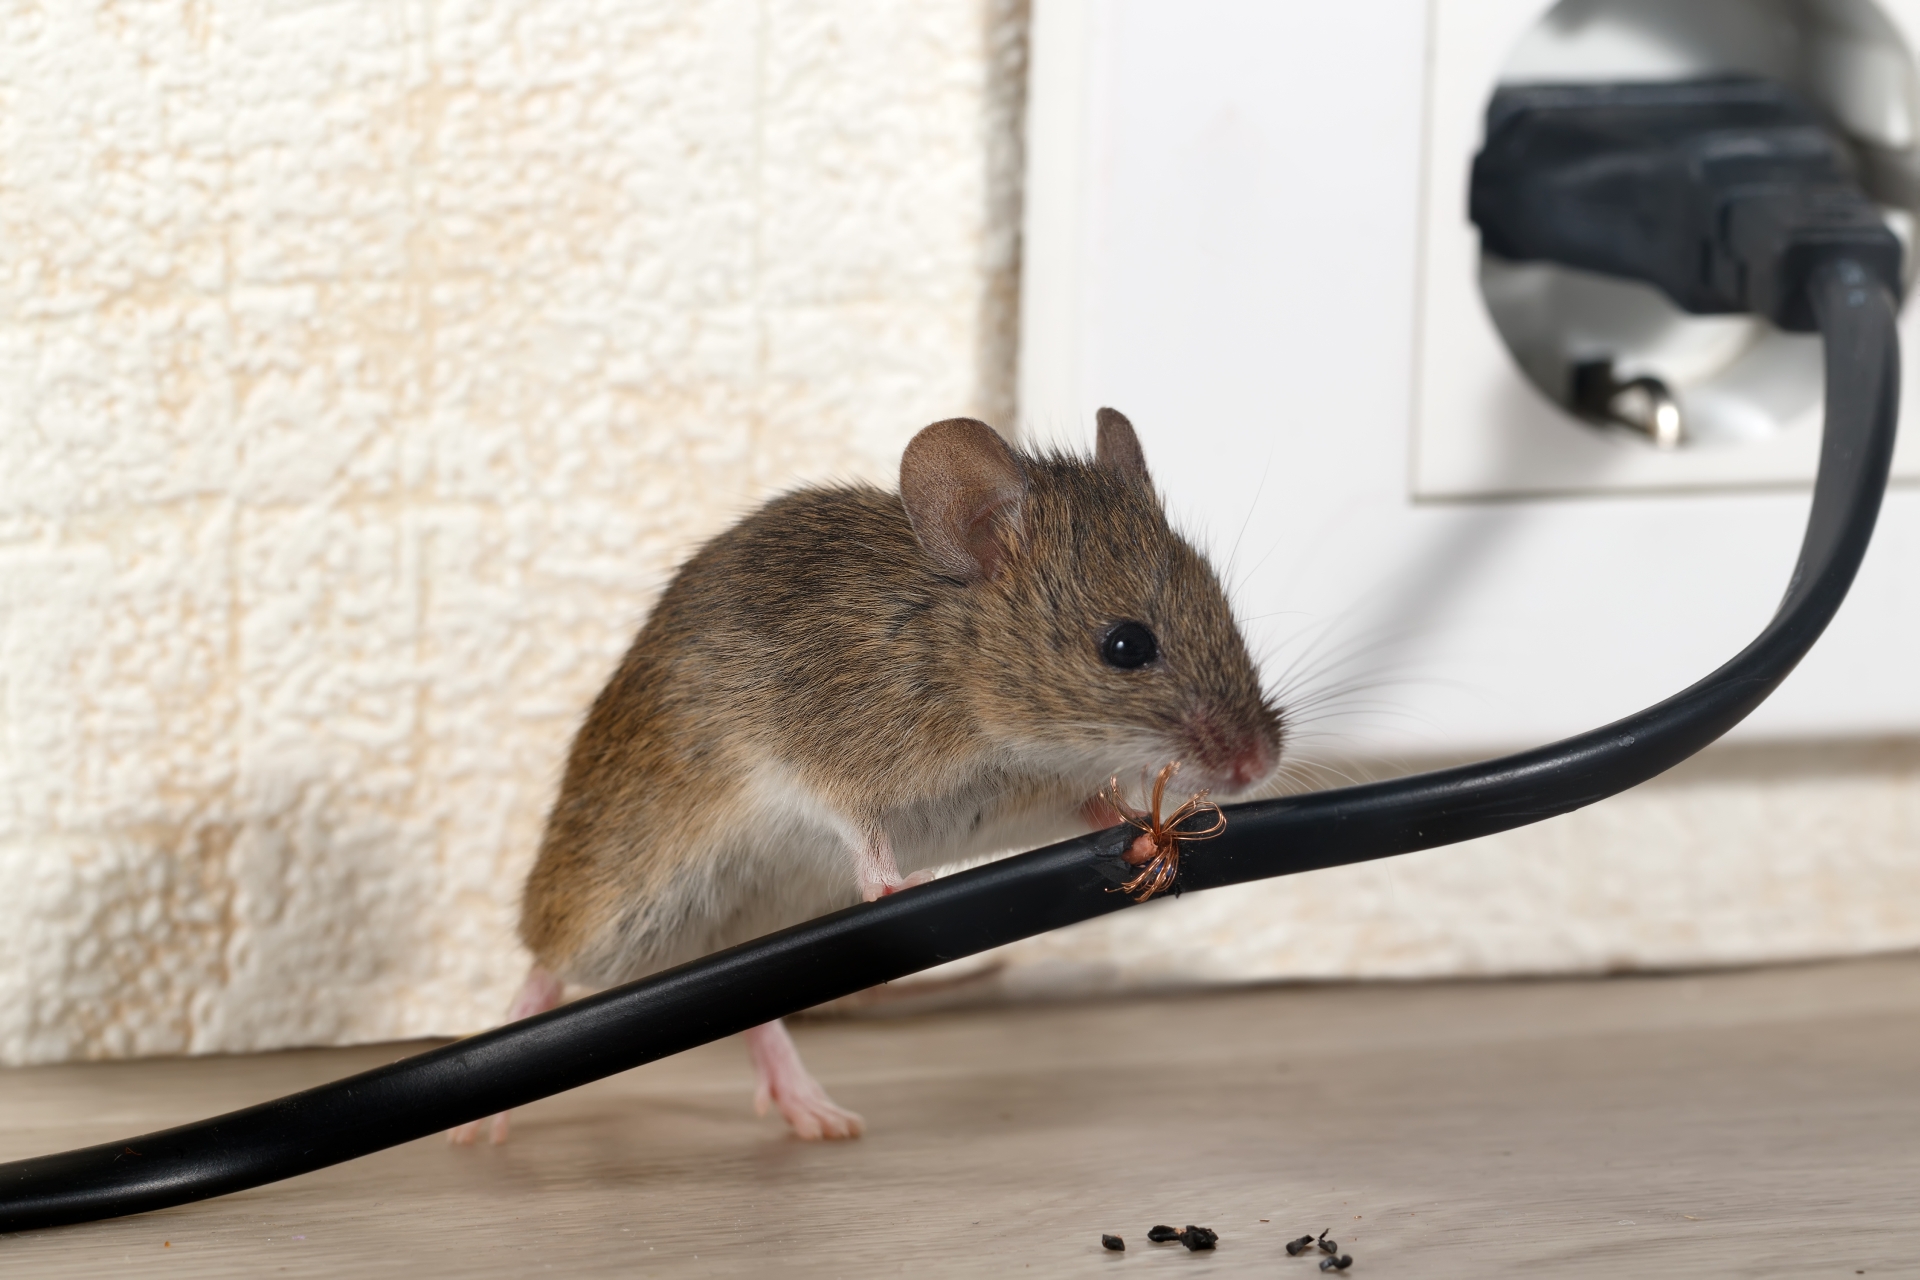 Mice Infestation, Pest Control in Kew, North Sheen, TW9. Call Now 020 8166 9746